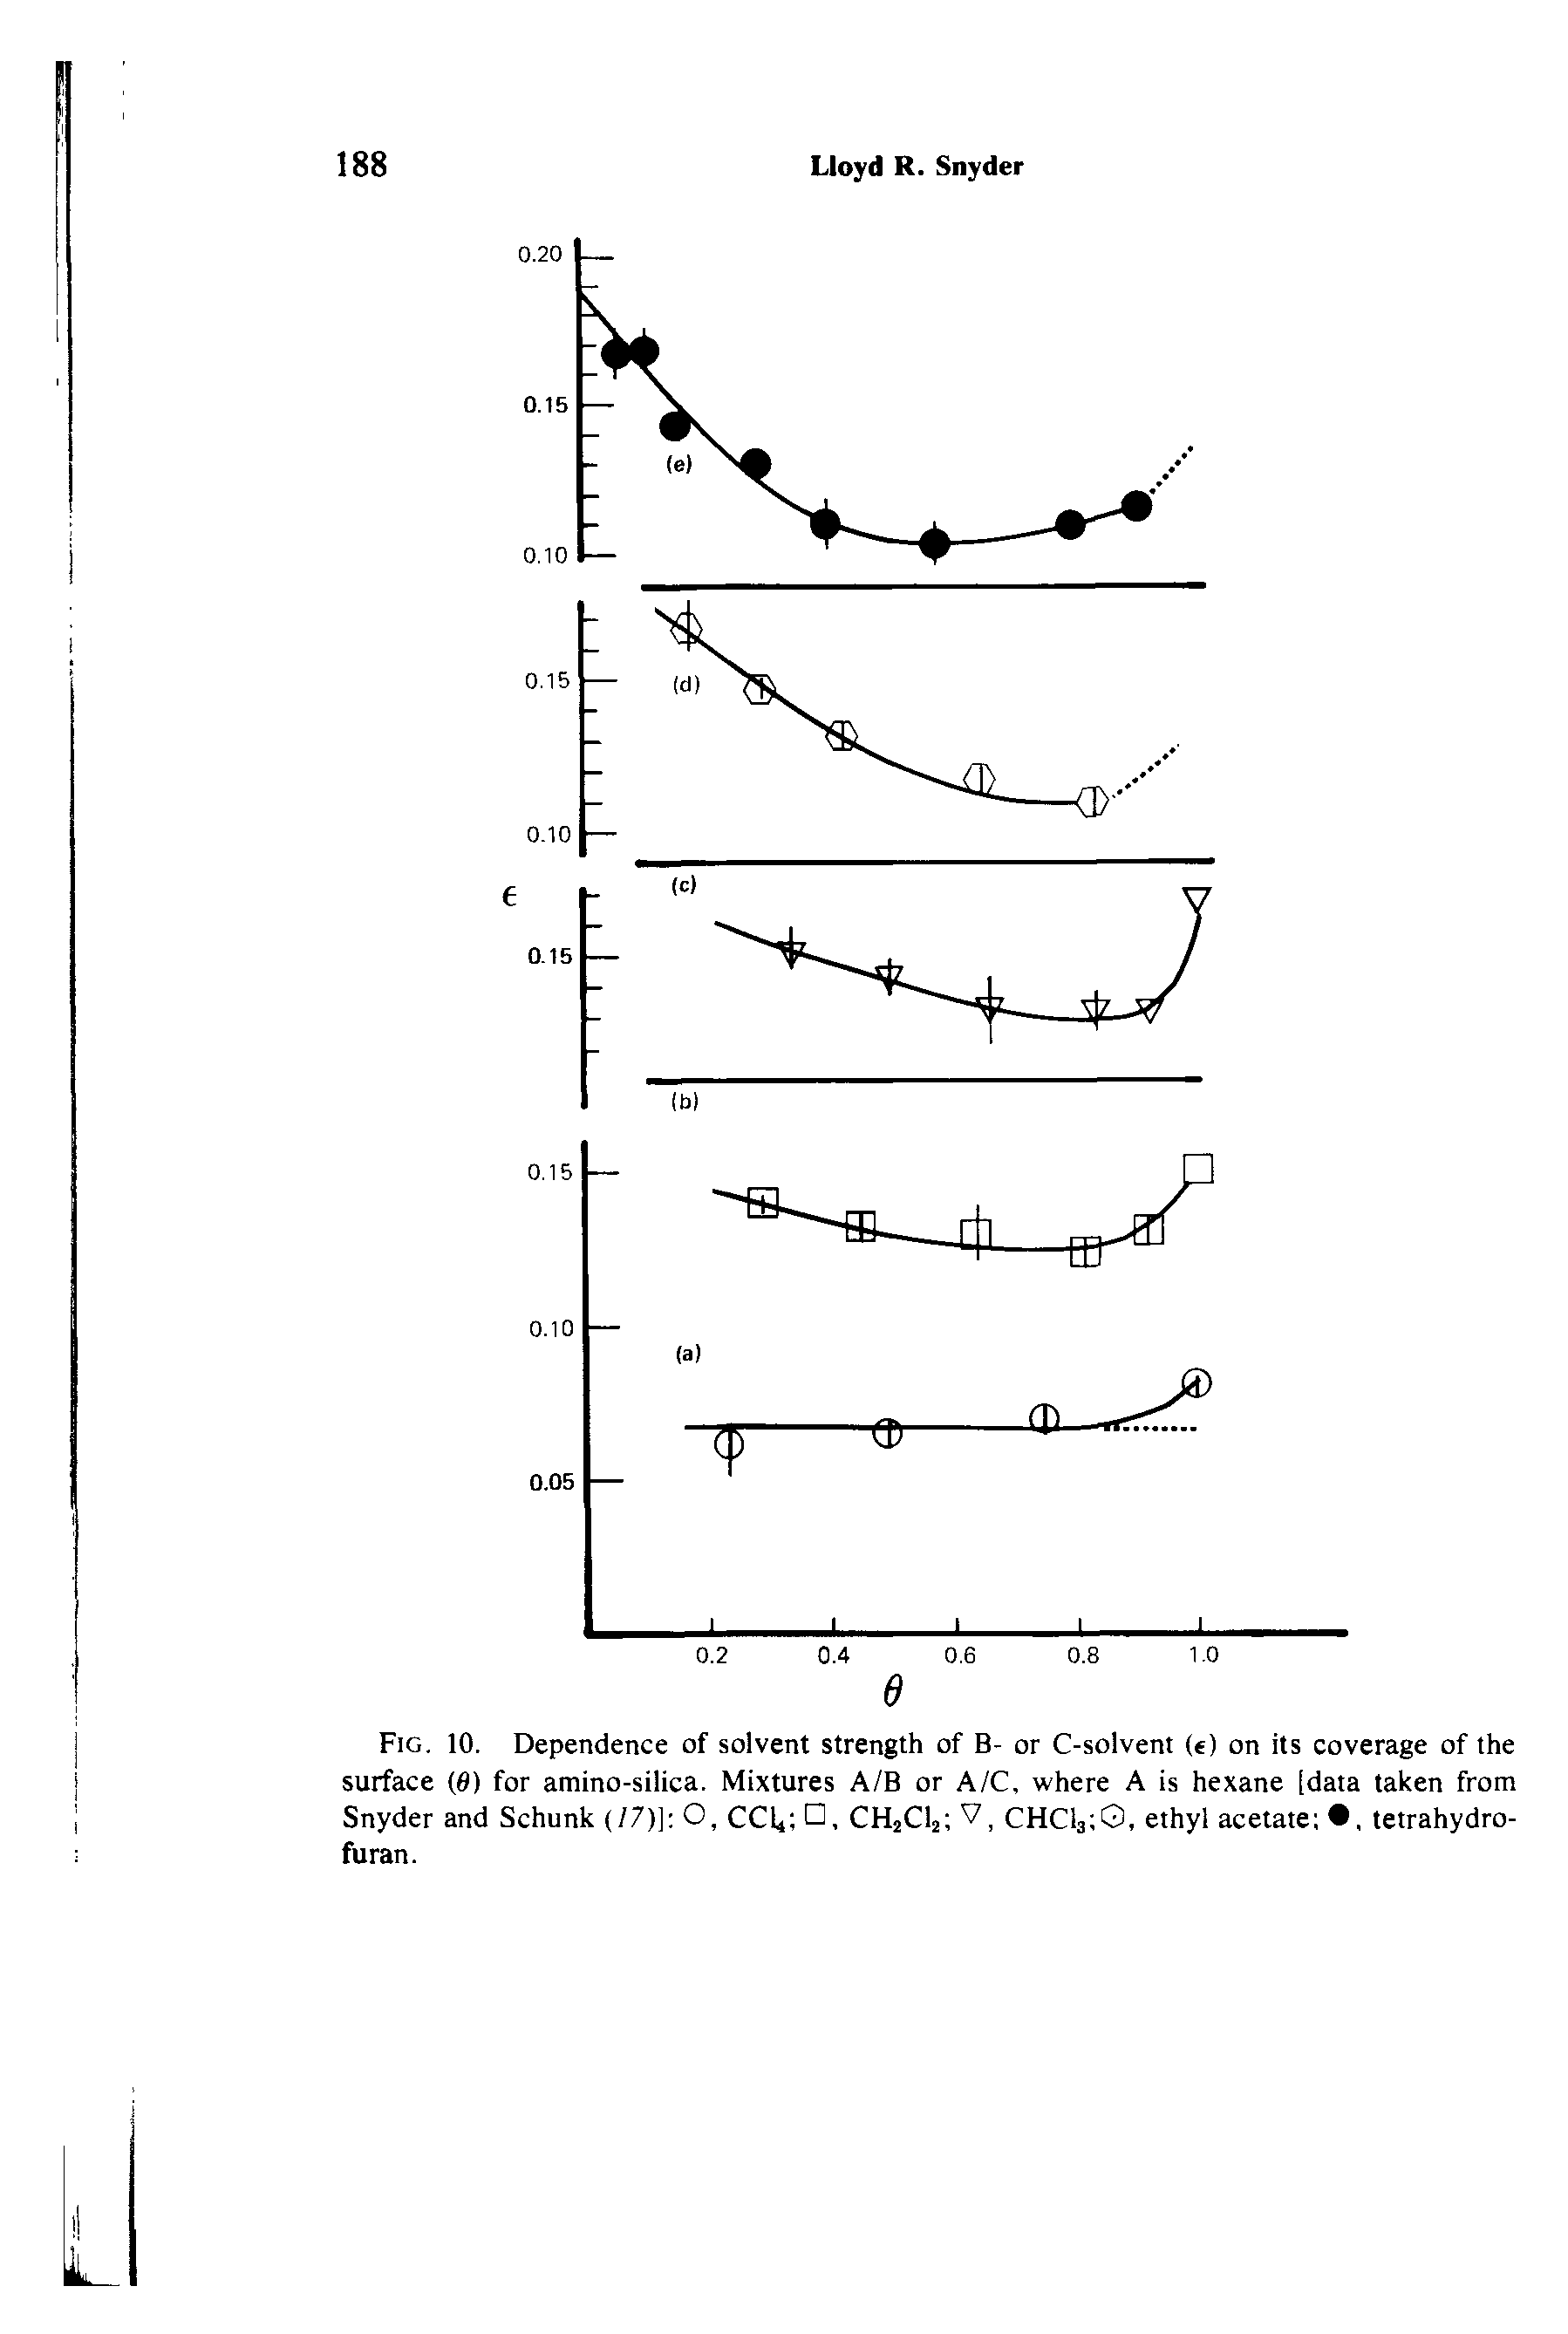 Fig. 10. Dependence of solvent strength of B- or C-solvent (e) on its coverage of the surface (0) for amino-silica. Mixtures A/B or A/C, where A is hexane [data taken from Snyder and Schunk (/7)] O, CCl , CHjCla V, CHClatQ, ethyl acetate , tetrahydro-furan.